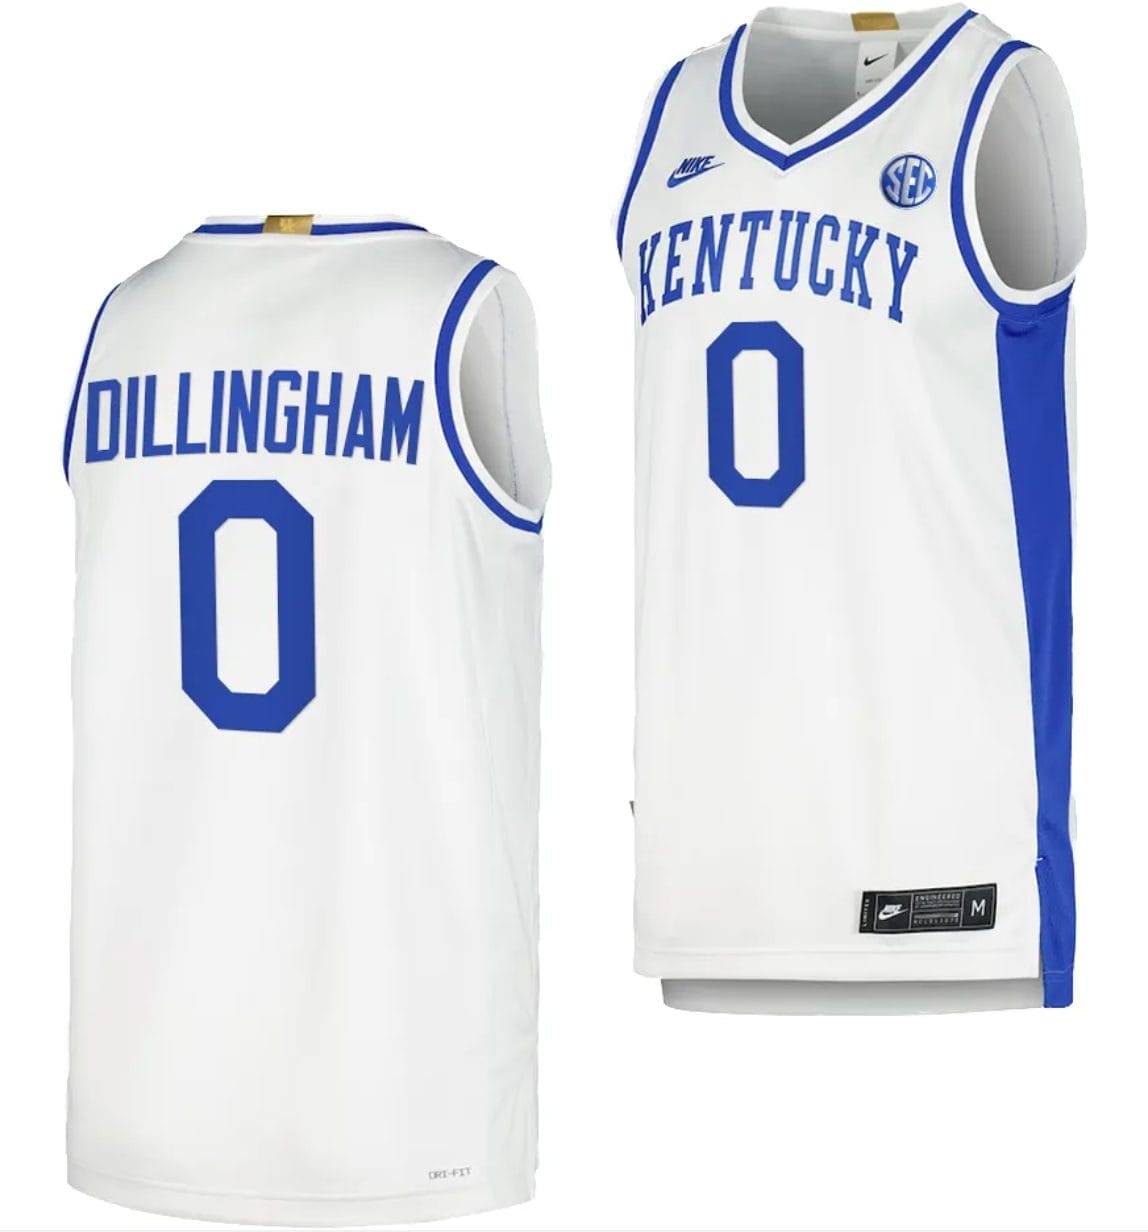 [Hot] Buy New Robert Dillingham Jersey 0 Limited White 202324